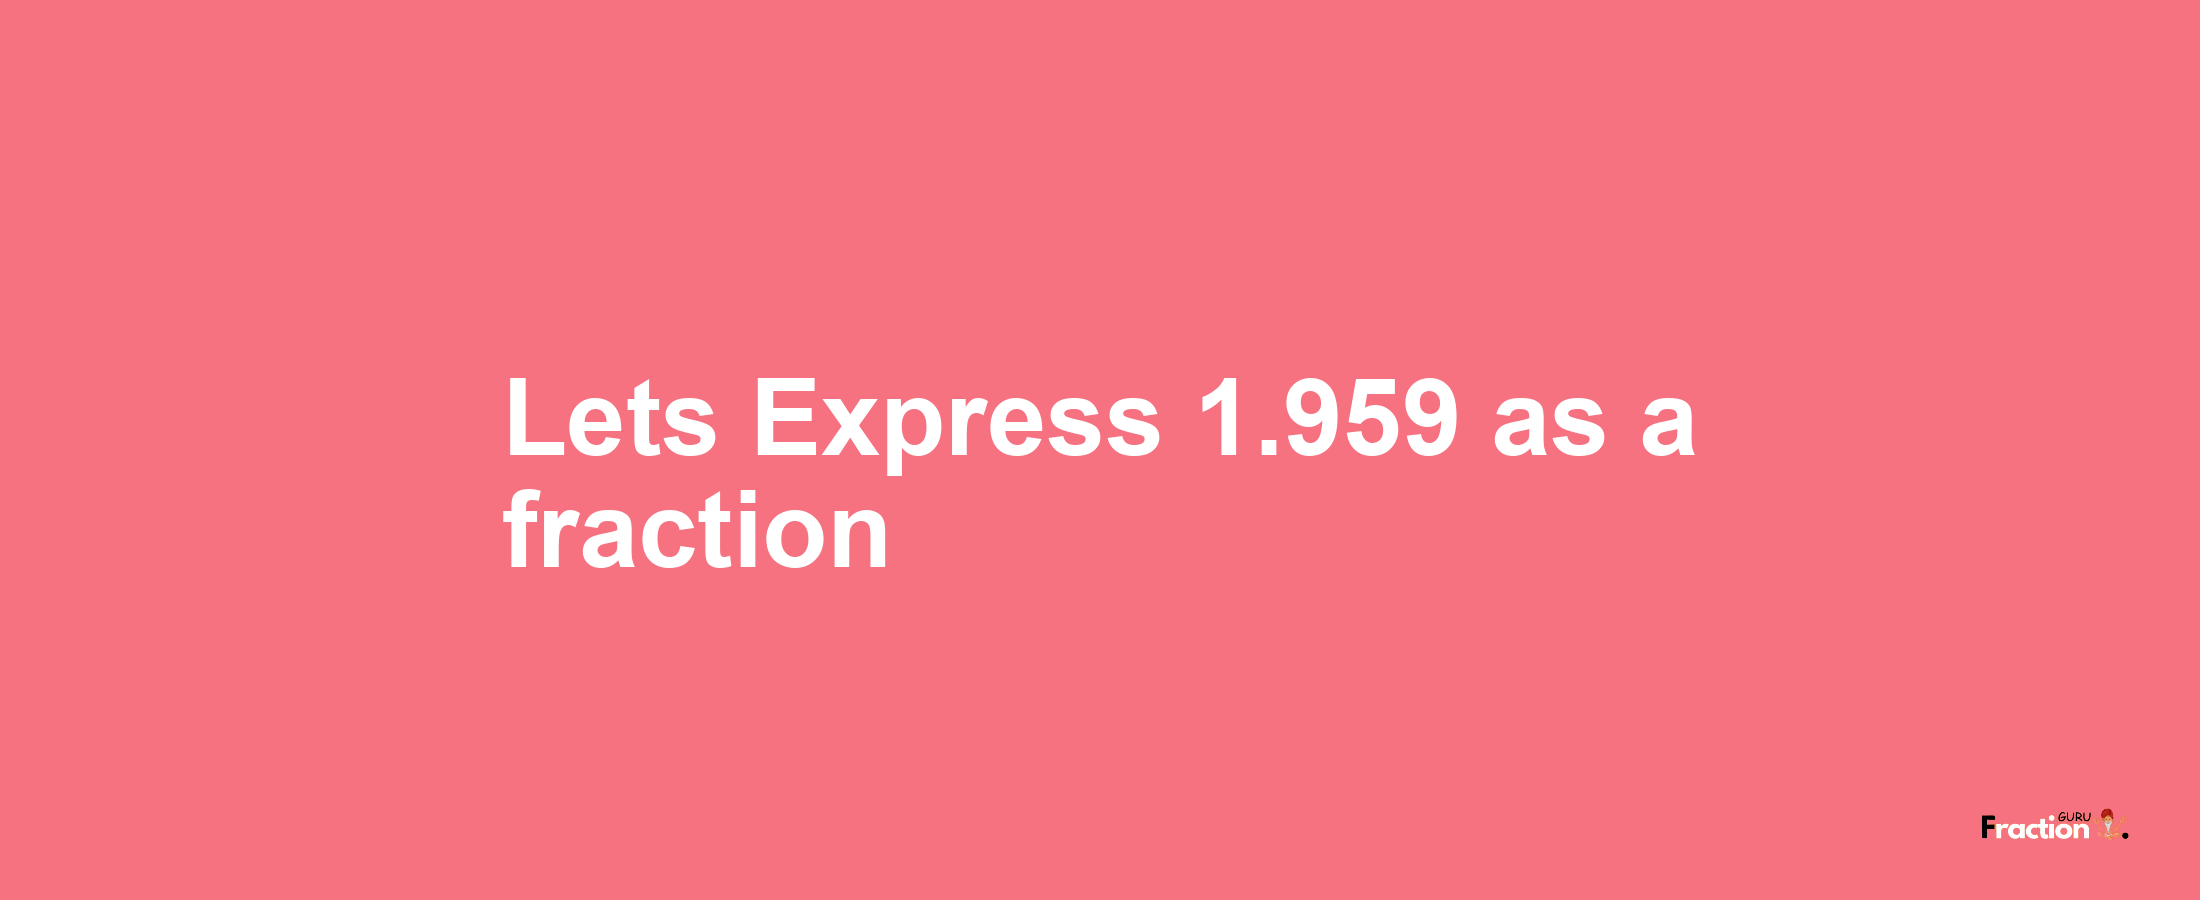 Lets Express 1.959 as afraction